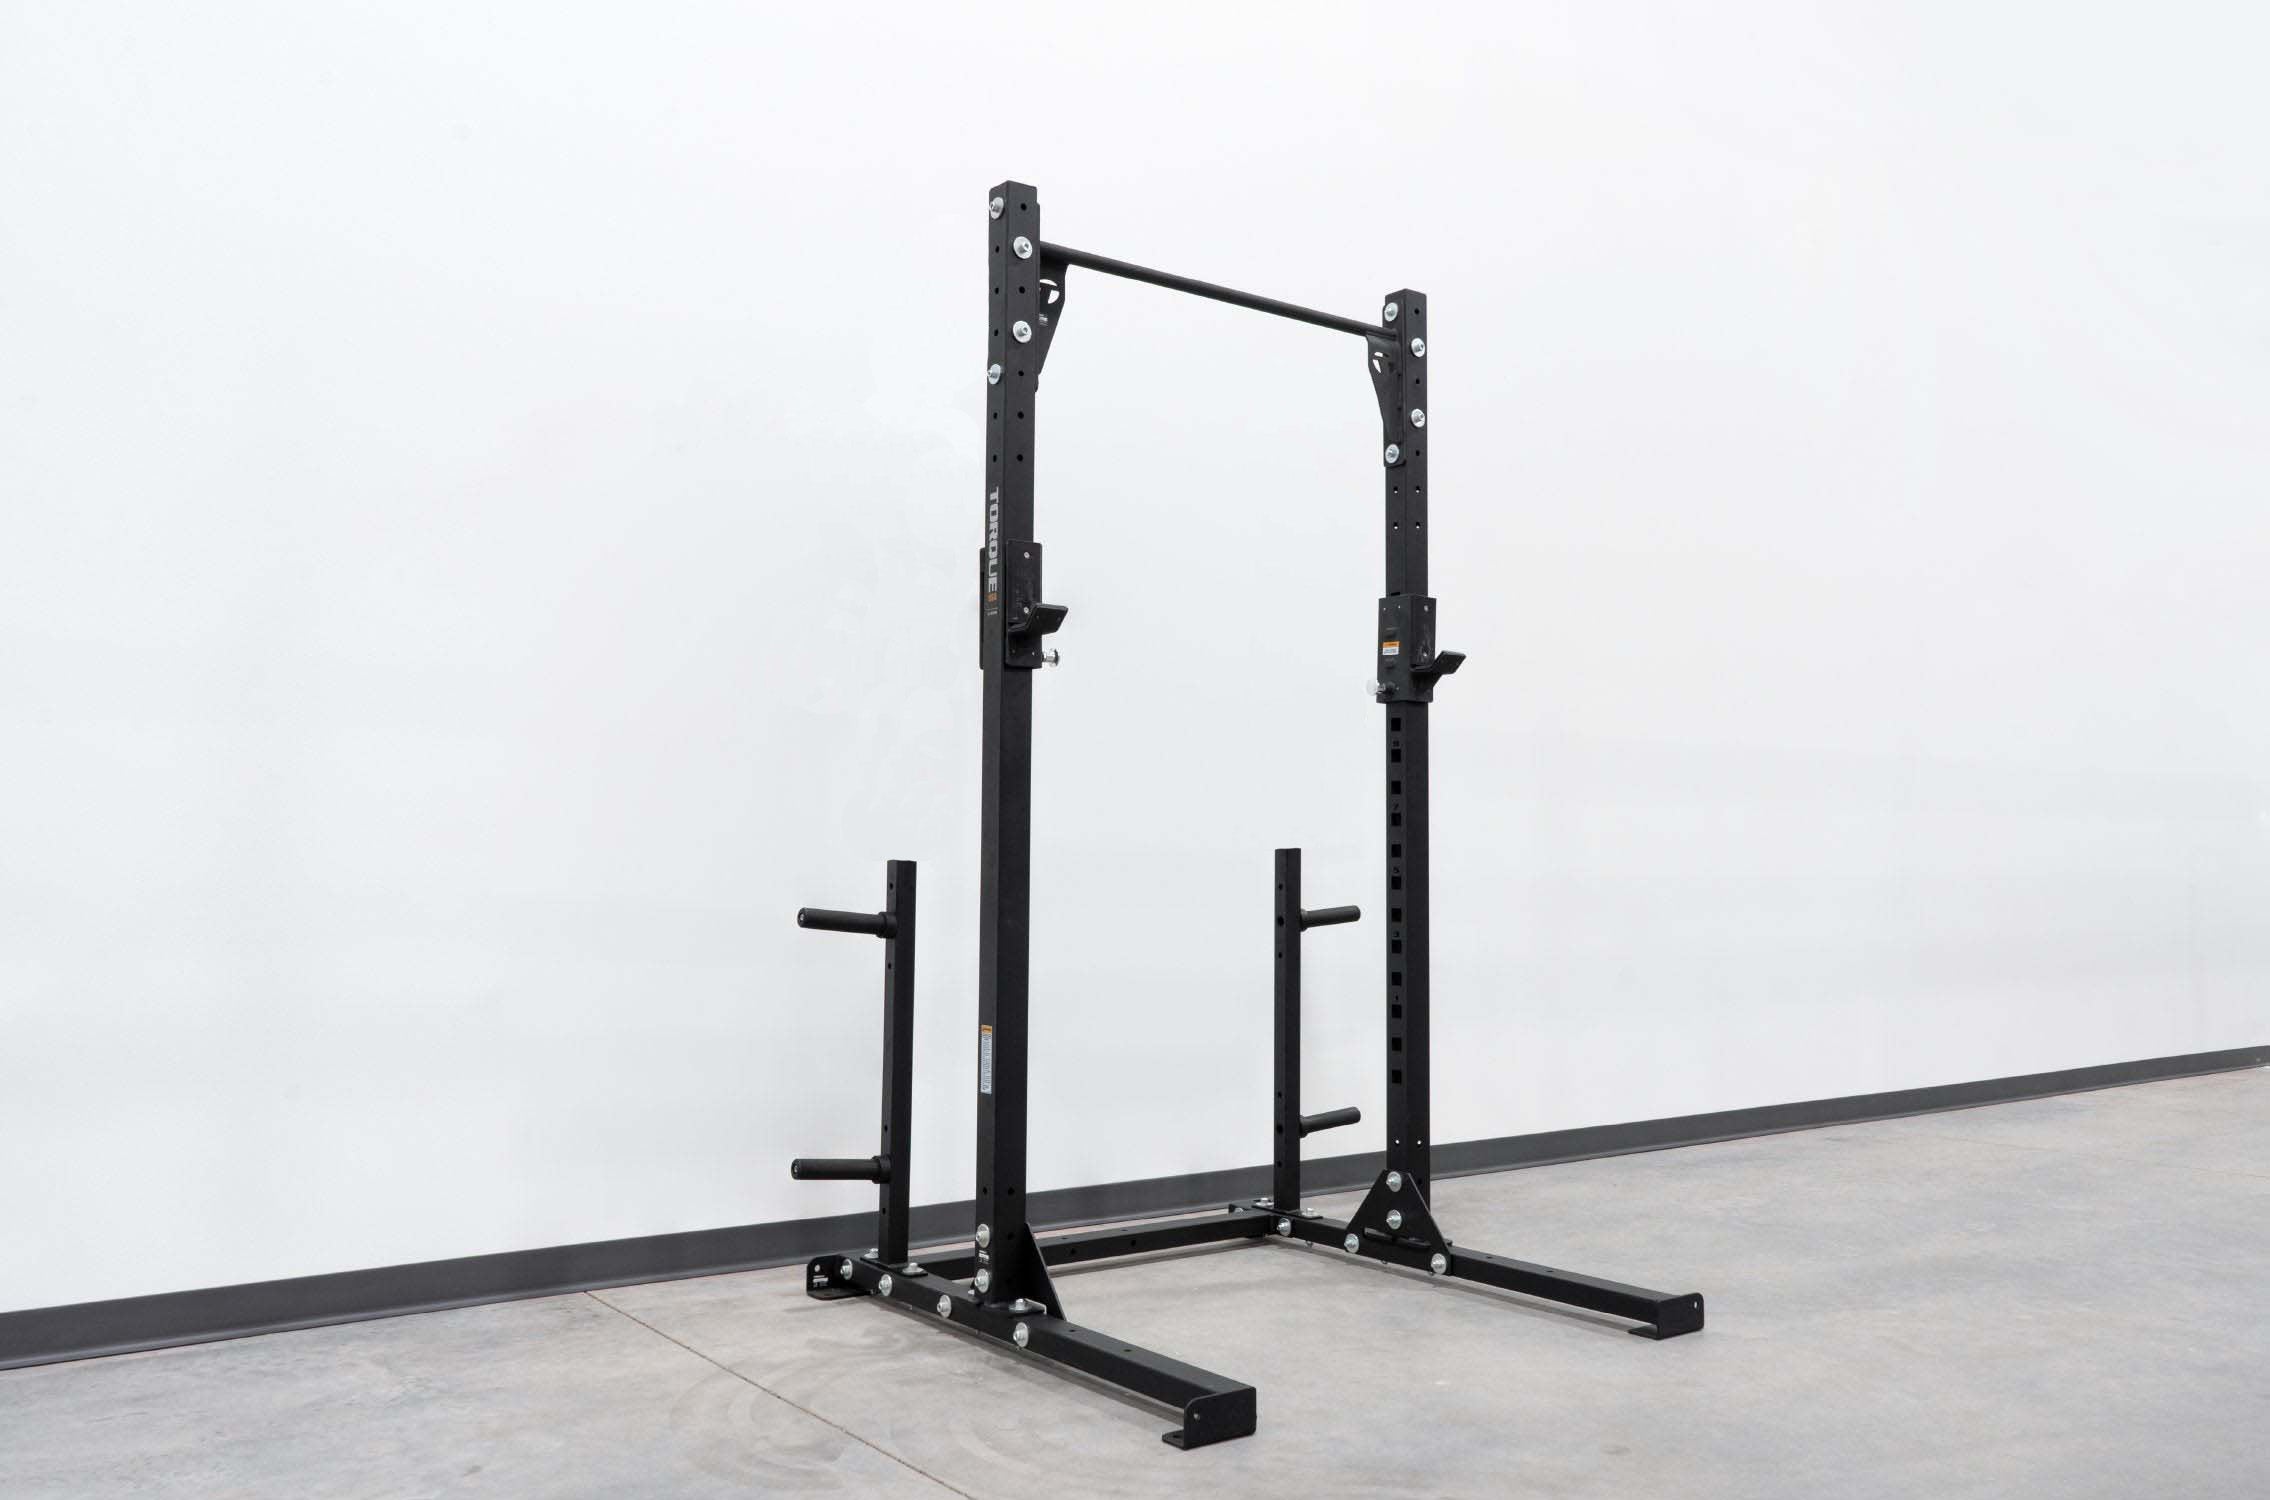 Let's Create Your Dream Home Gym – BLK BOX